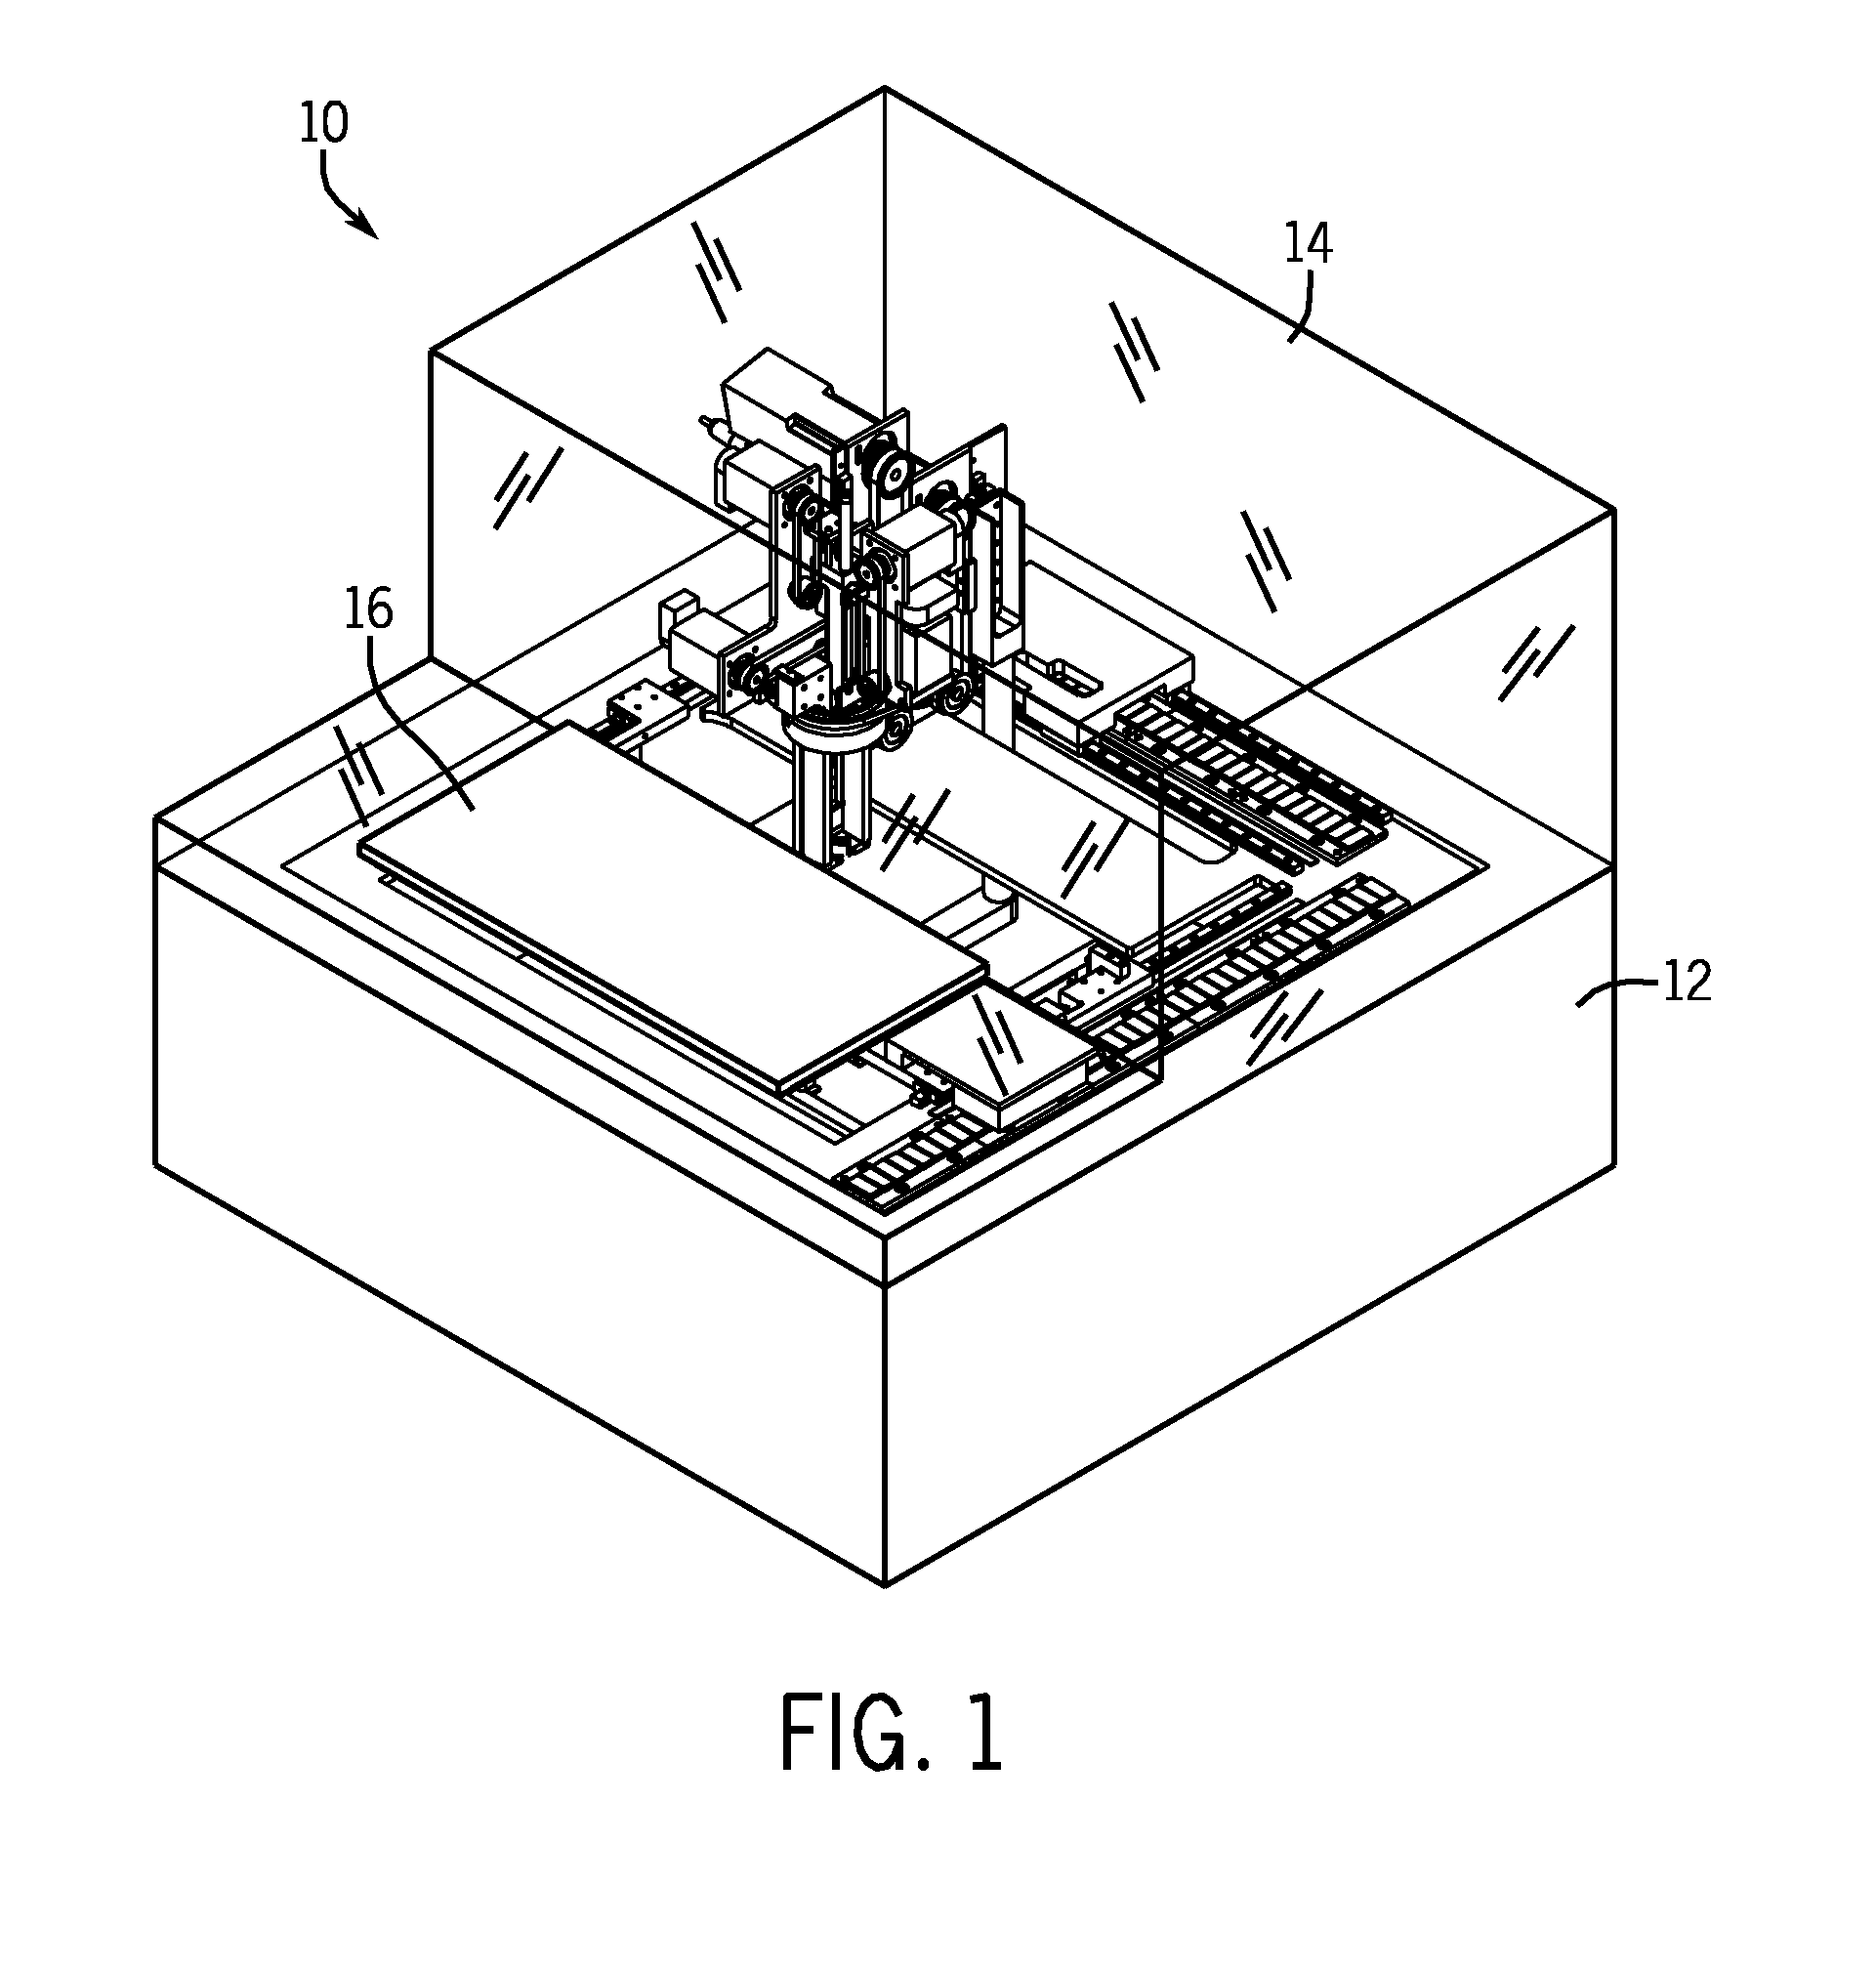 Tube Picking Mechanisms with an Ultra-Low Temperature or Cryogenic Picking Compartment